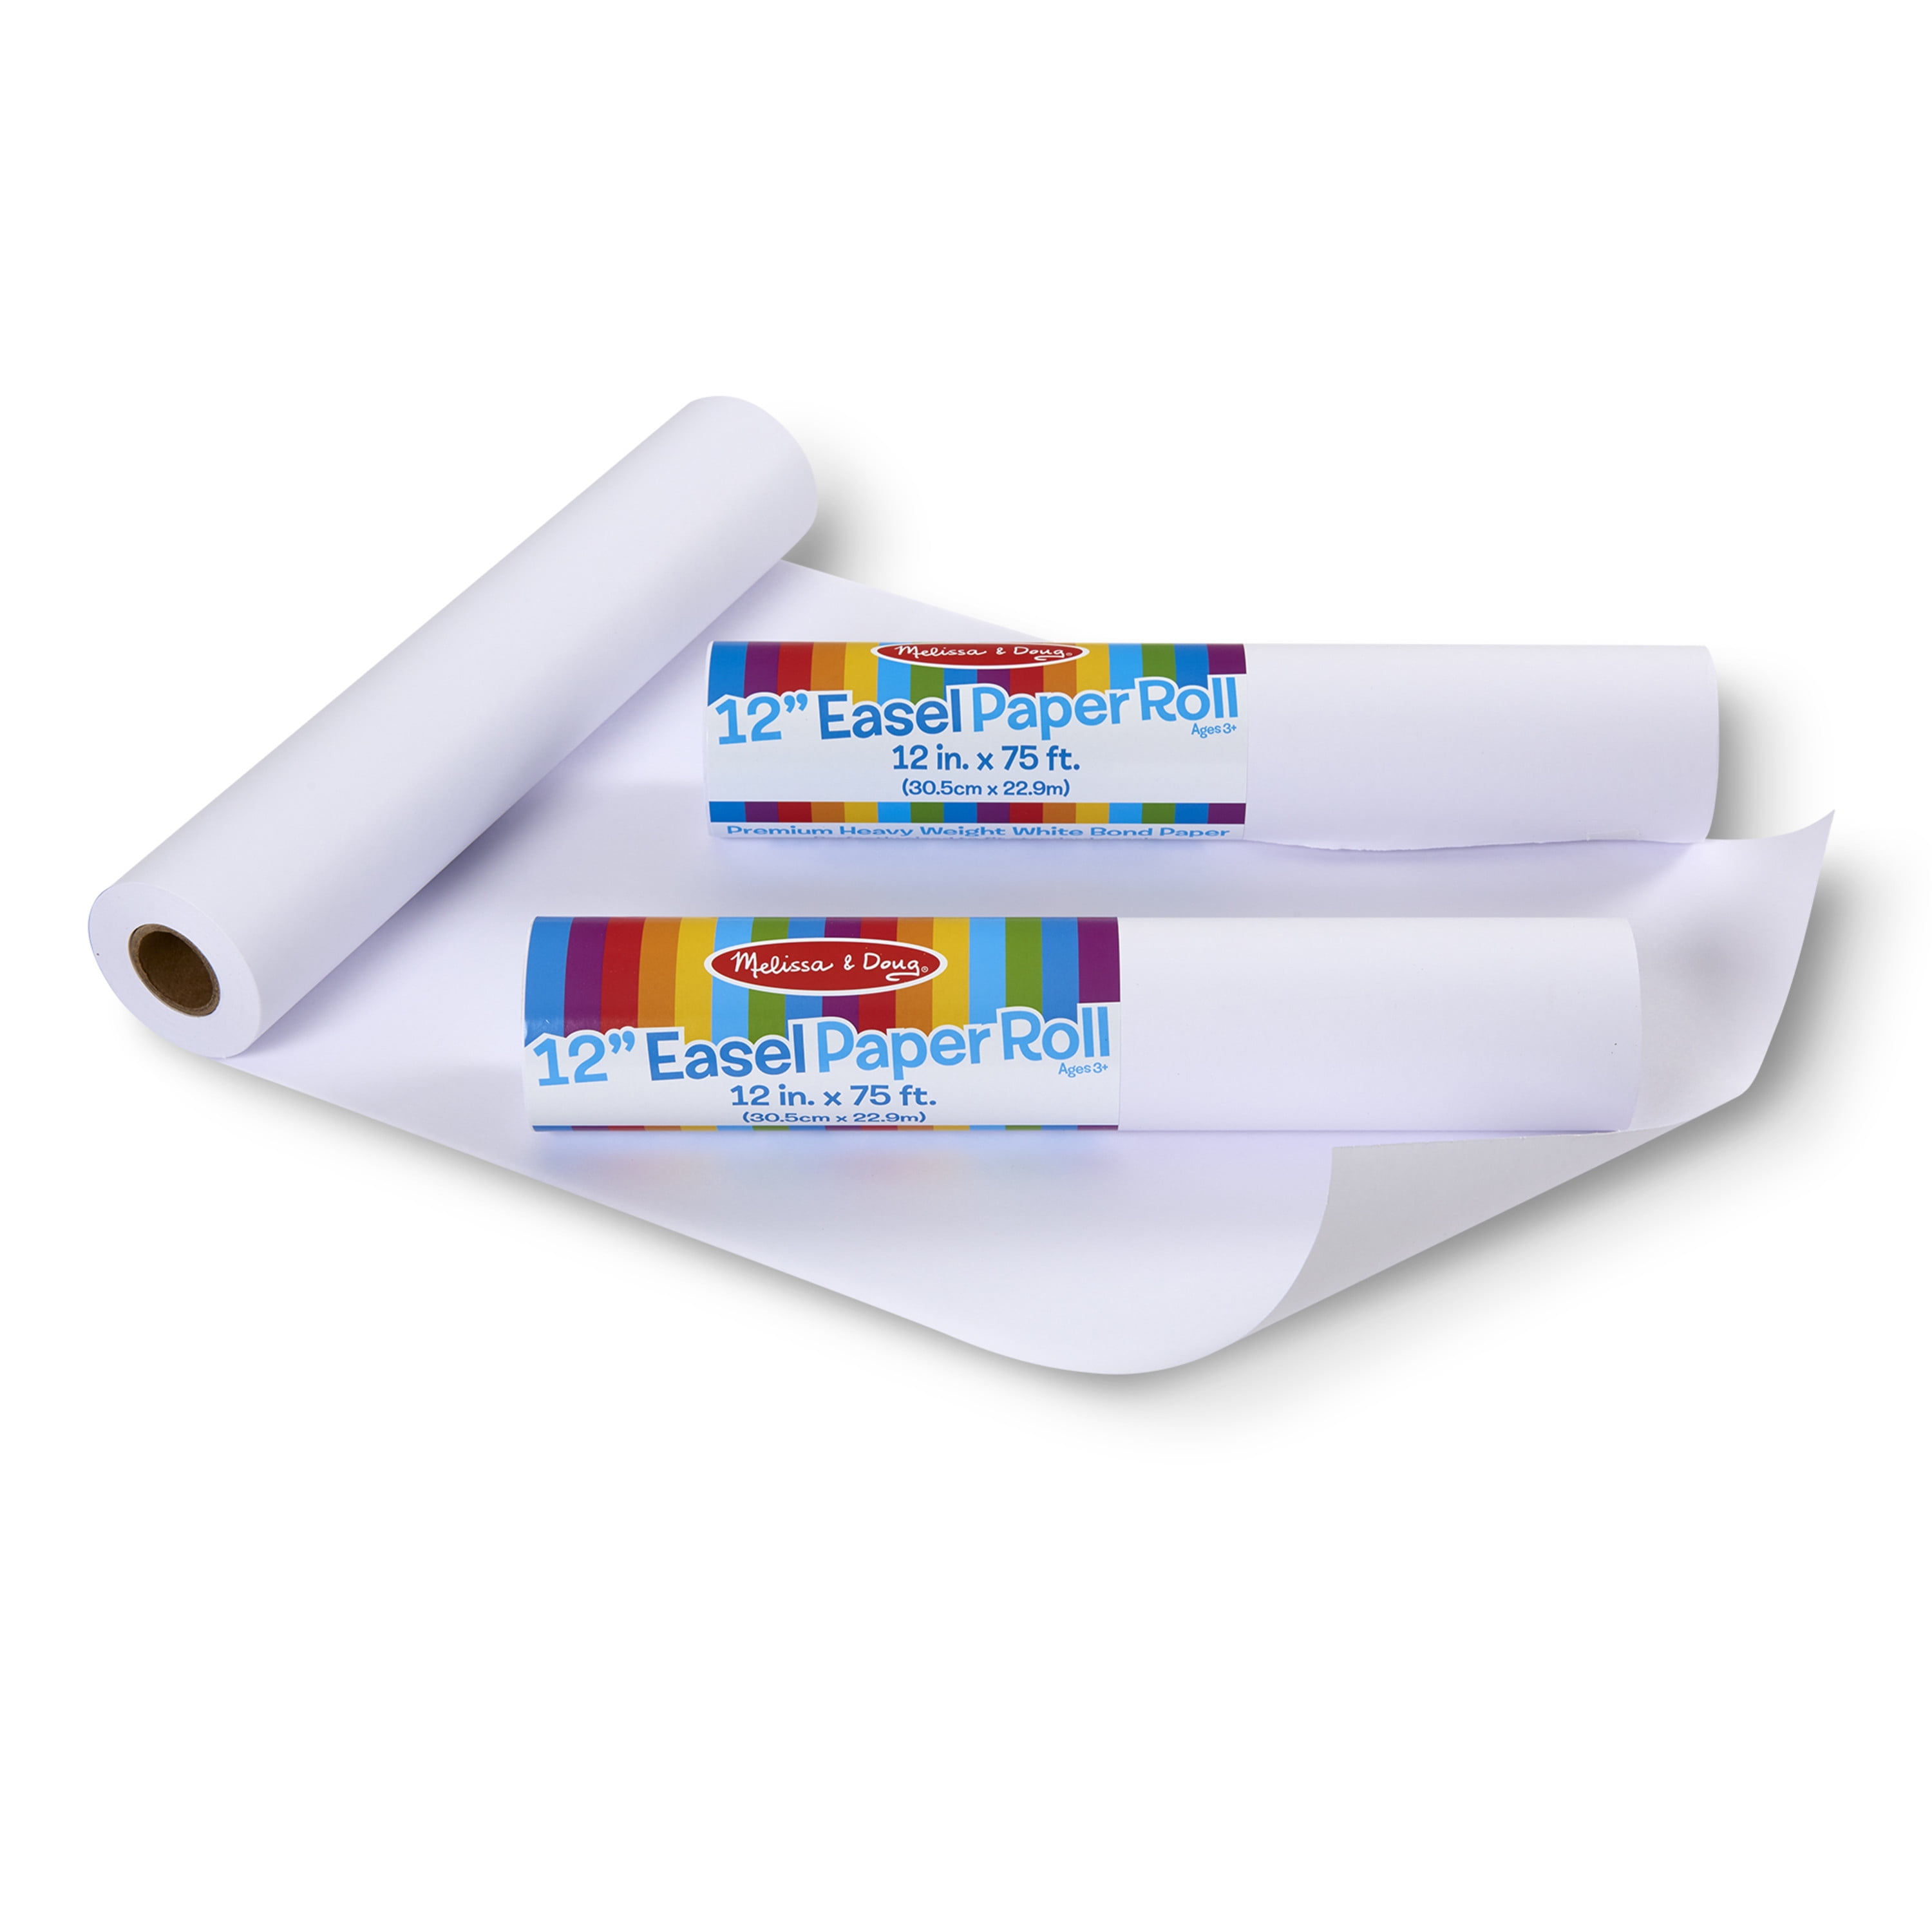  Melissa & Doug Tabletop Easel Paper Roll (12 inches x 75 feet)  - 2-Pack : Arts, Crafts & Sewing